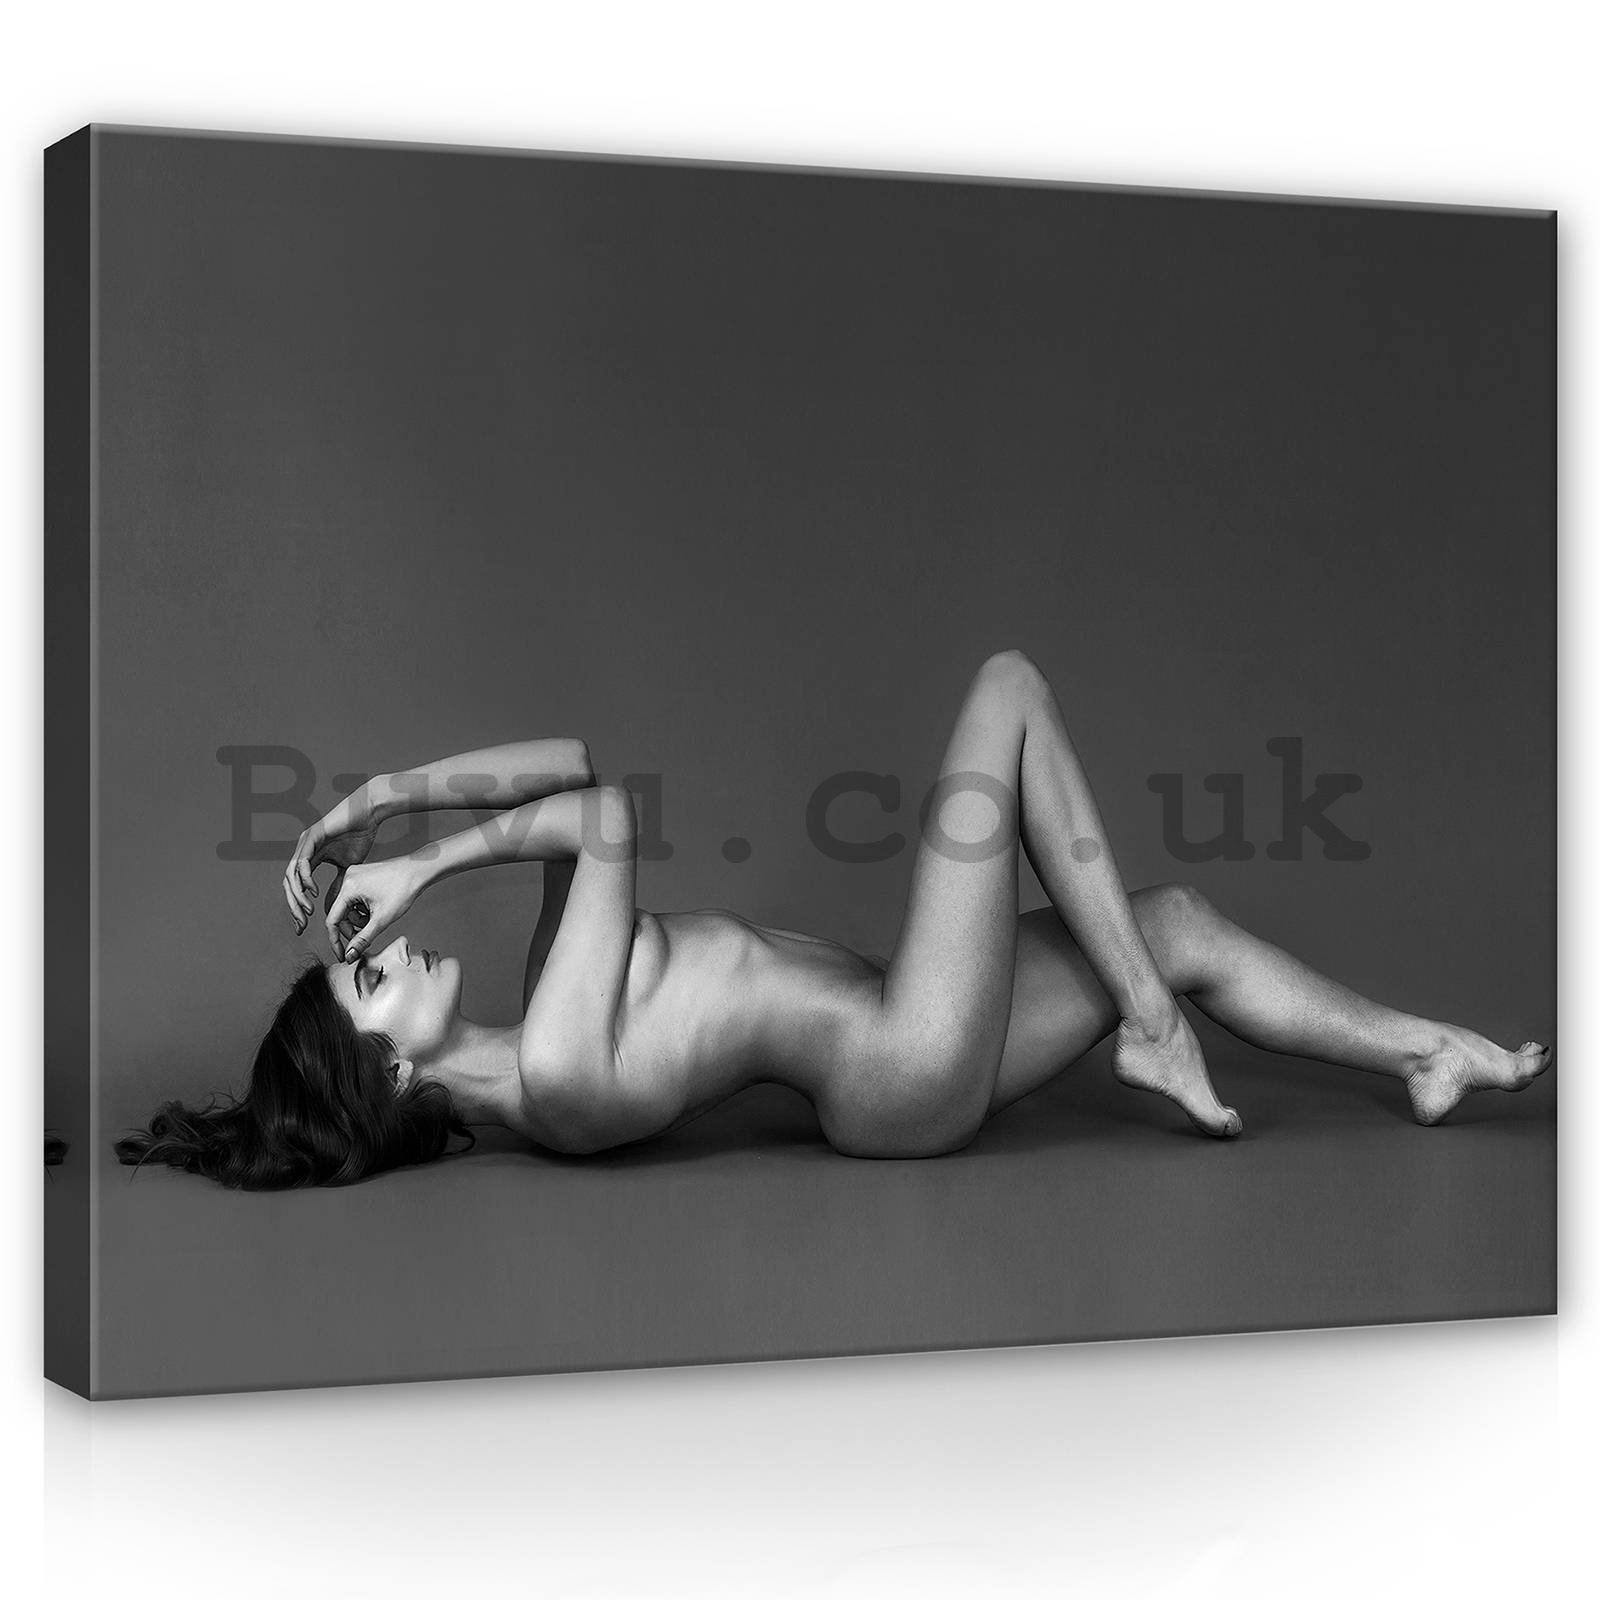 Painting on canvas: Erotic pose (1) - 80x60 cm